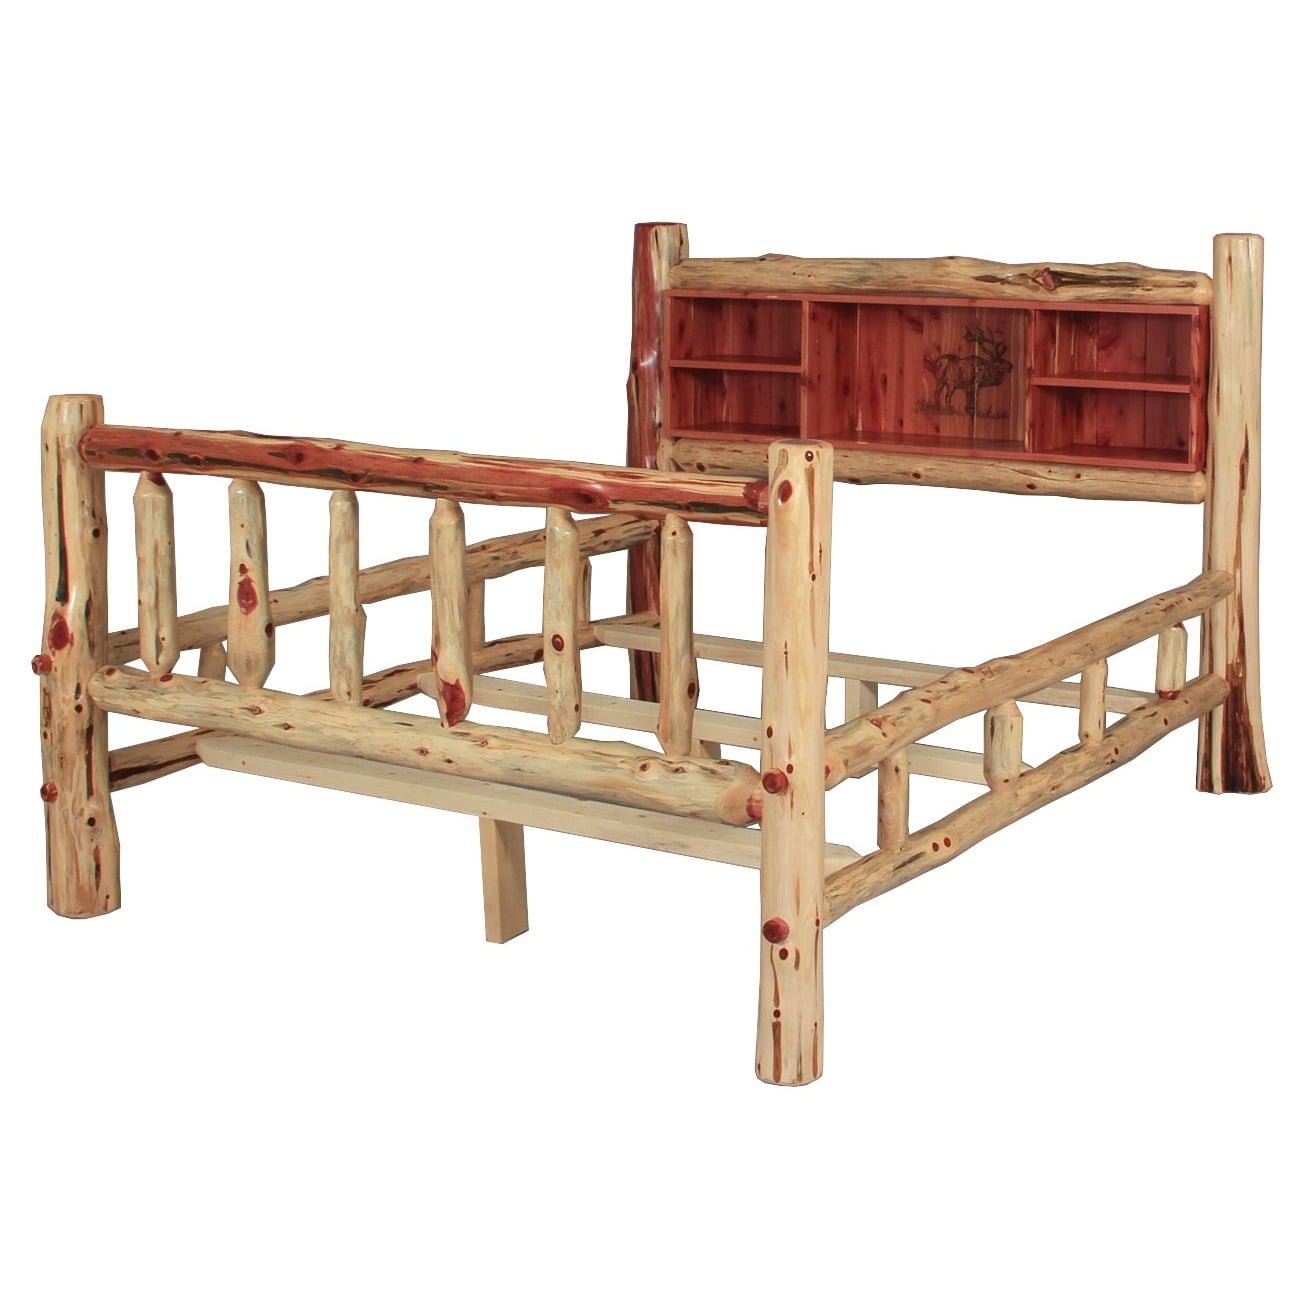 Rustic Red Cedar Log Mission Style Bookshelf Bed with Double Side Rail